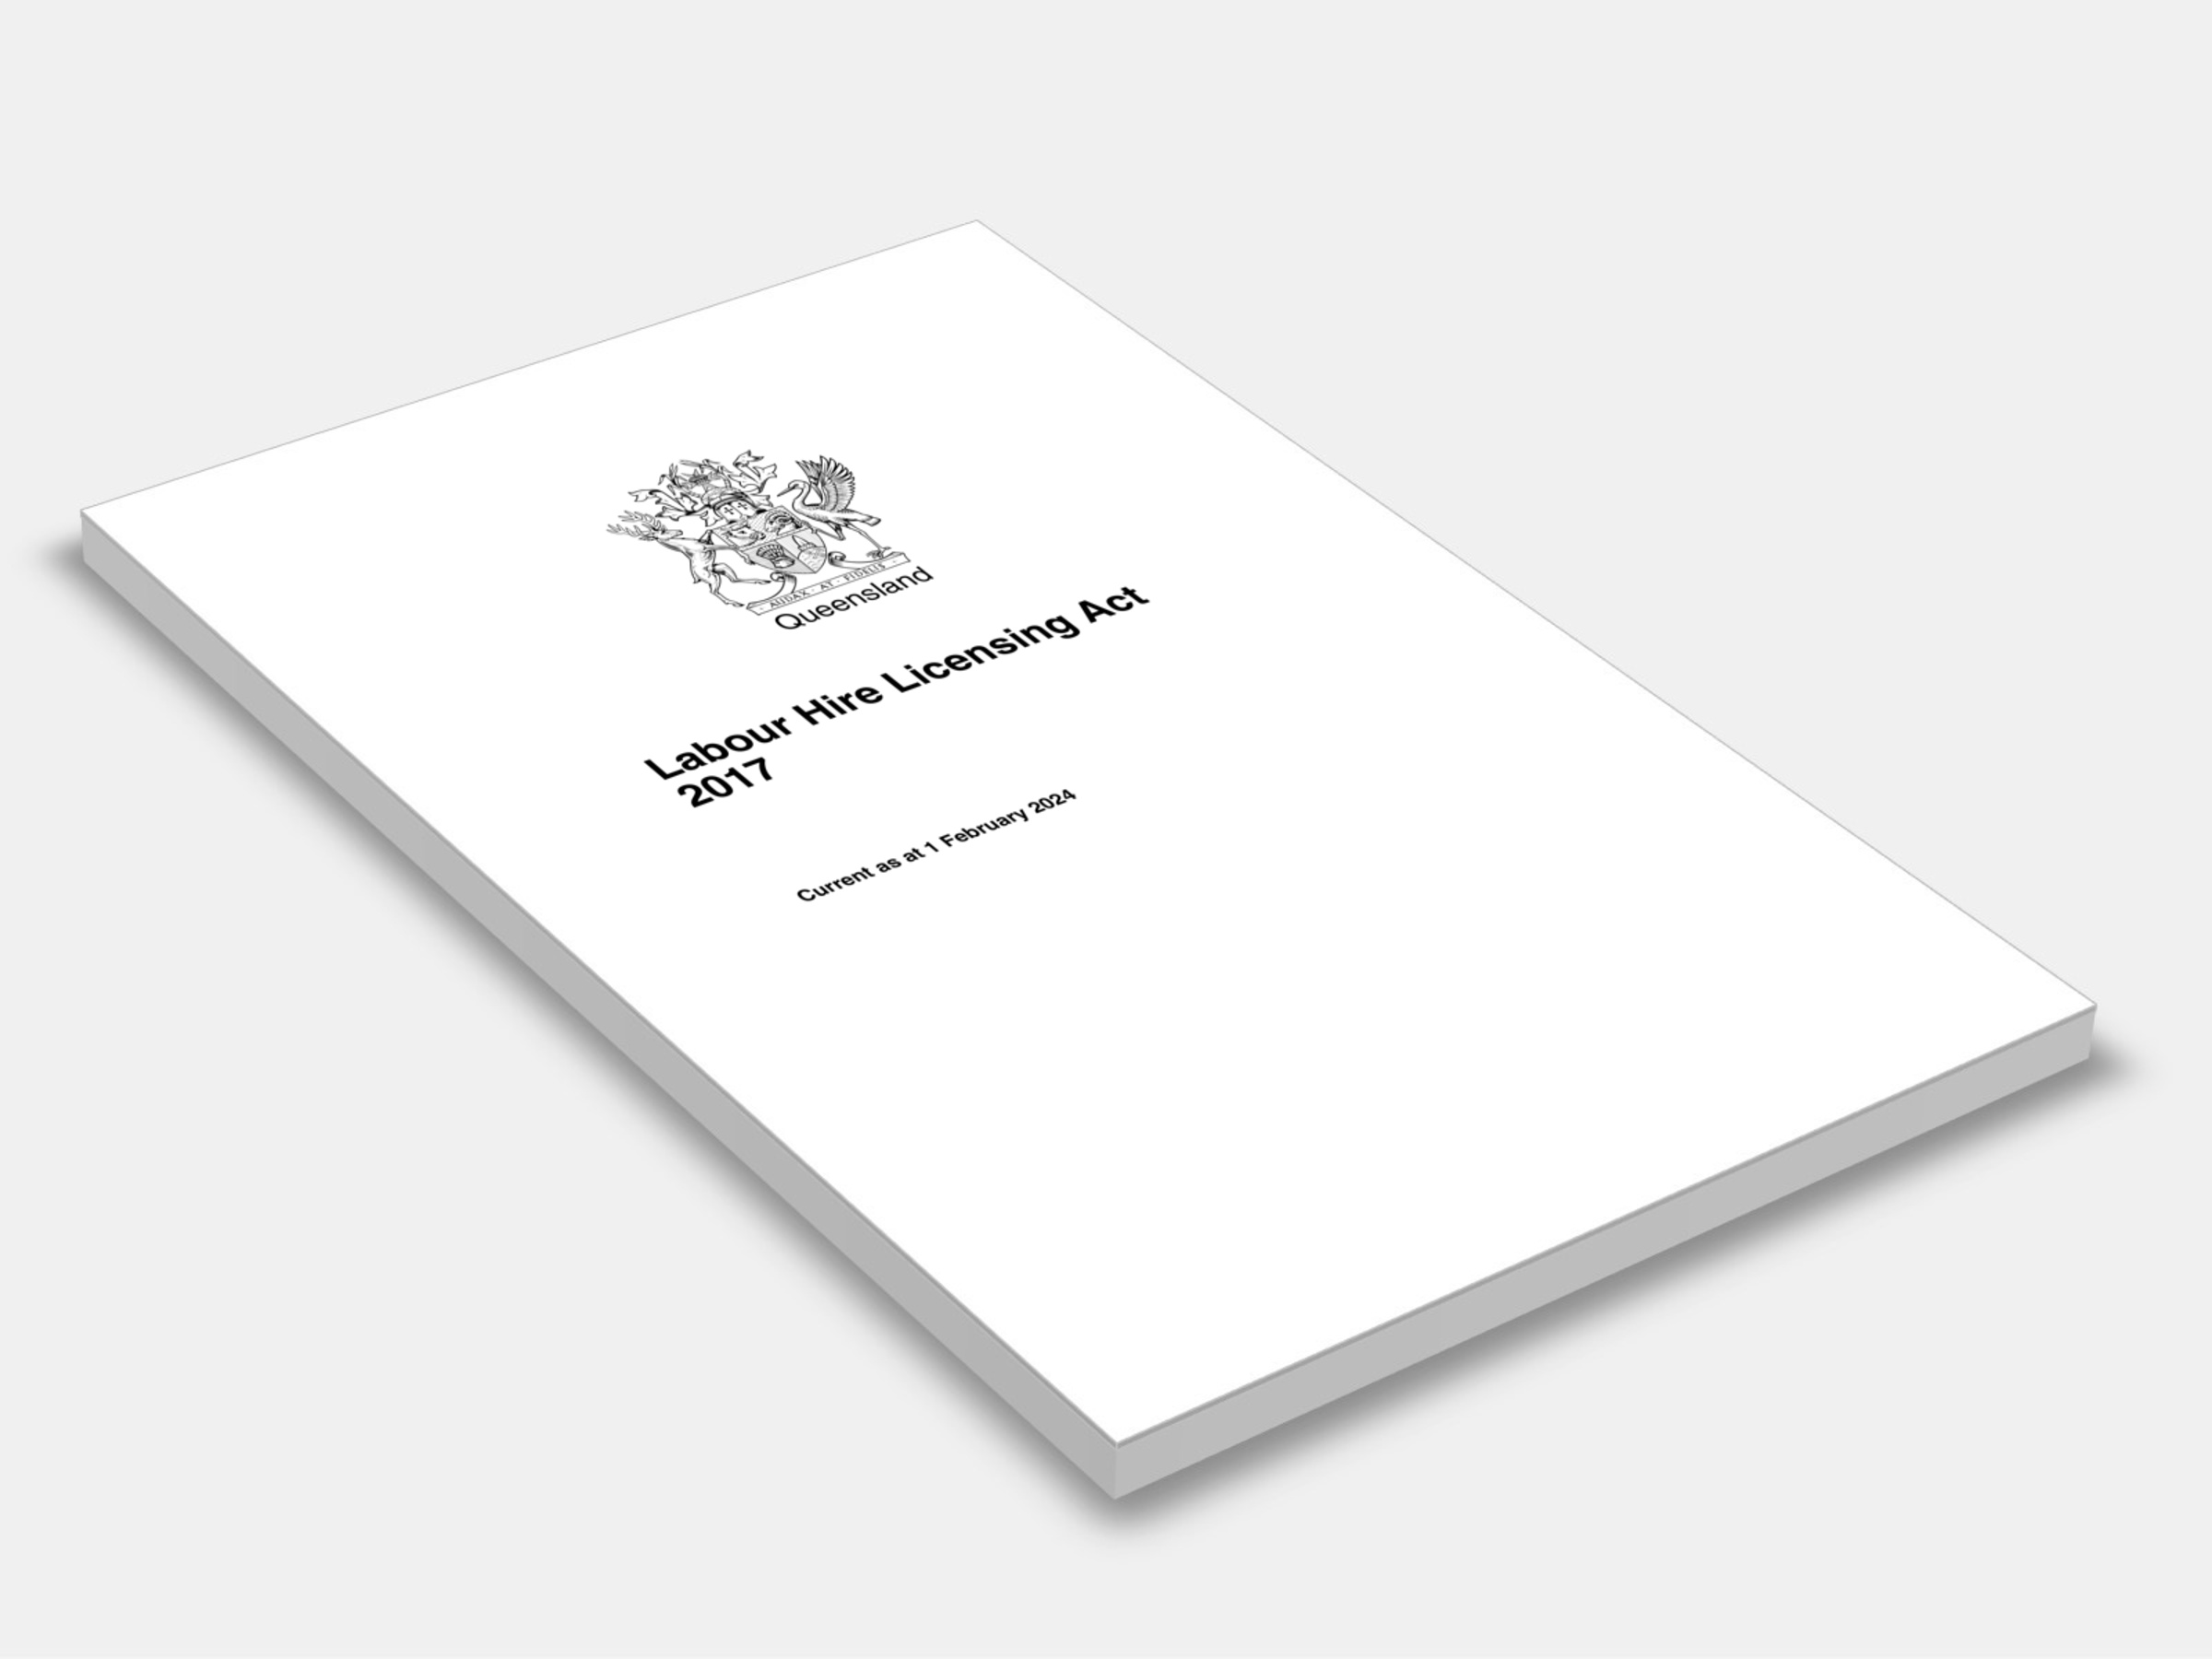 Labour Hire Licensing Act 2017 (QLD) 2017 cover